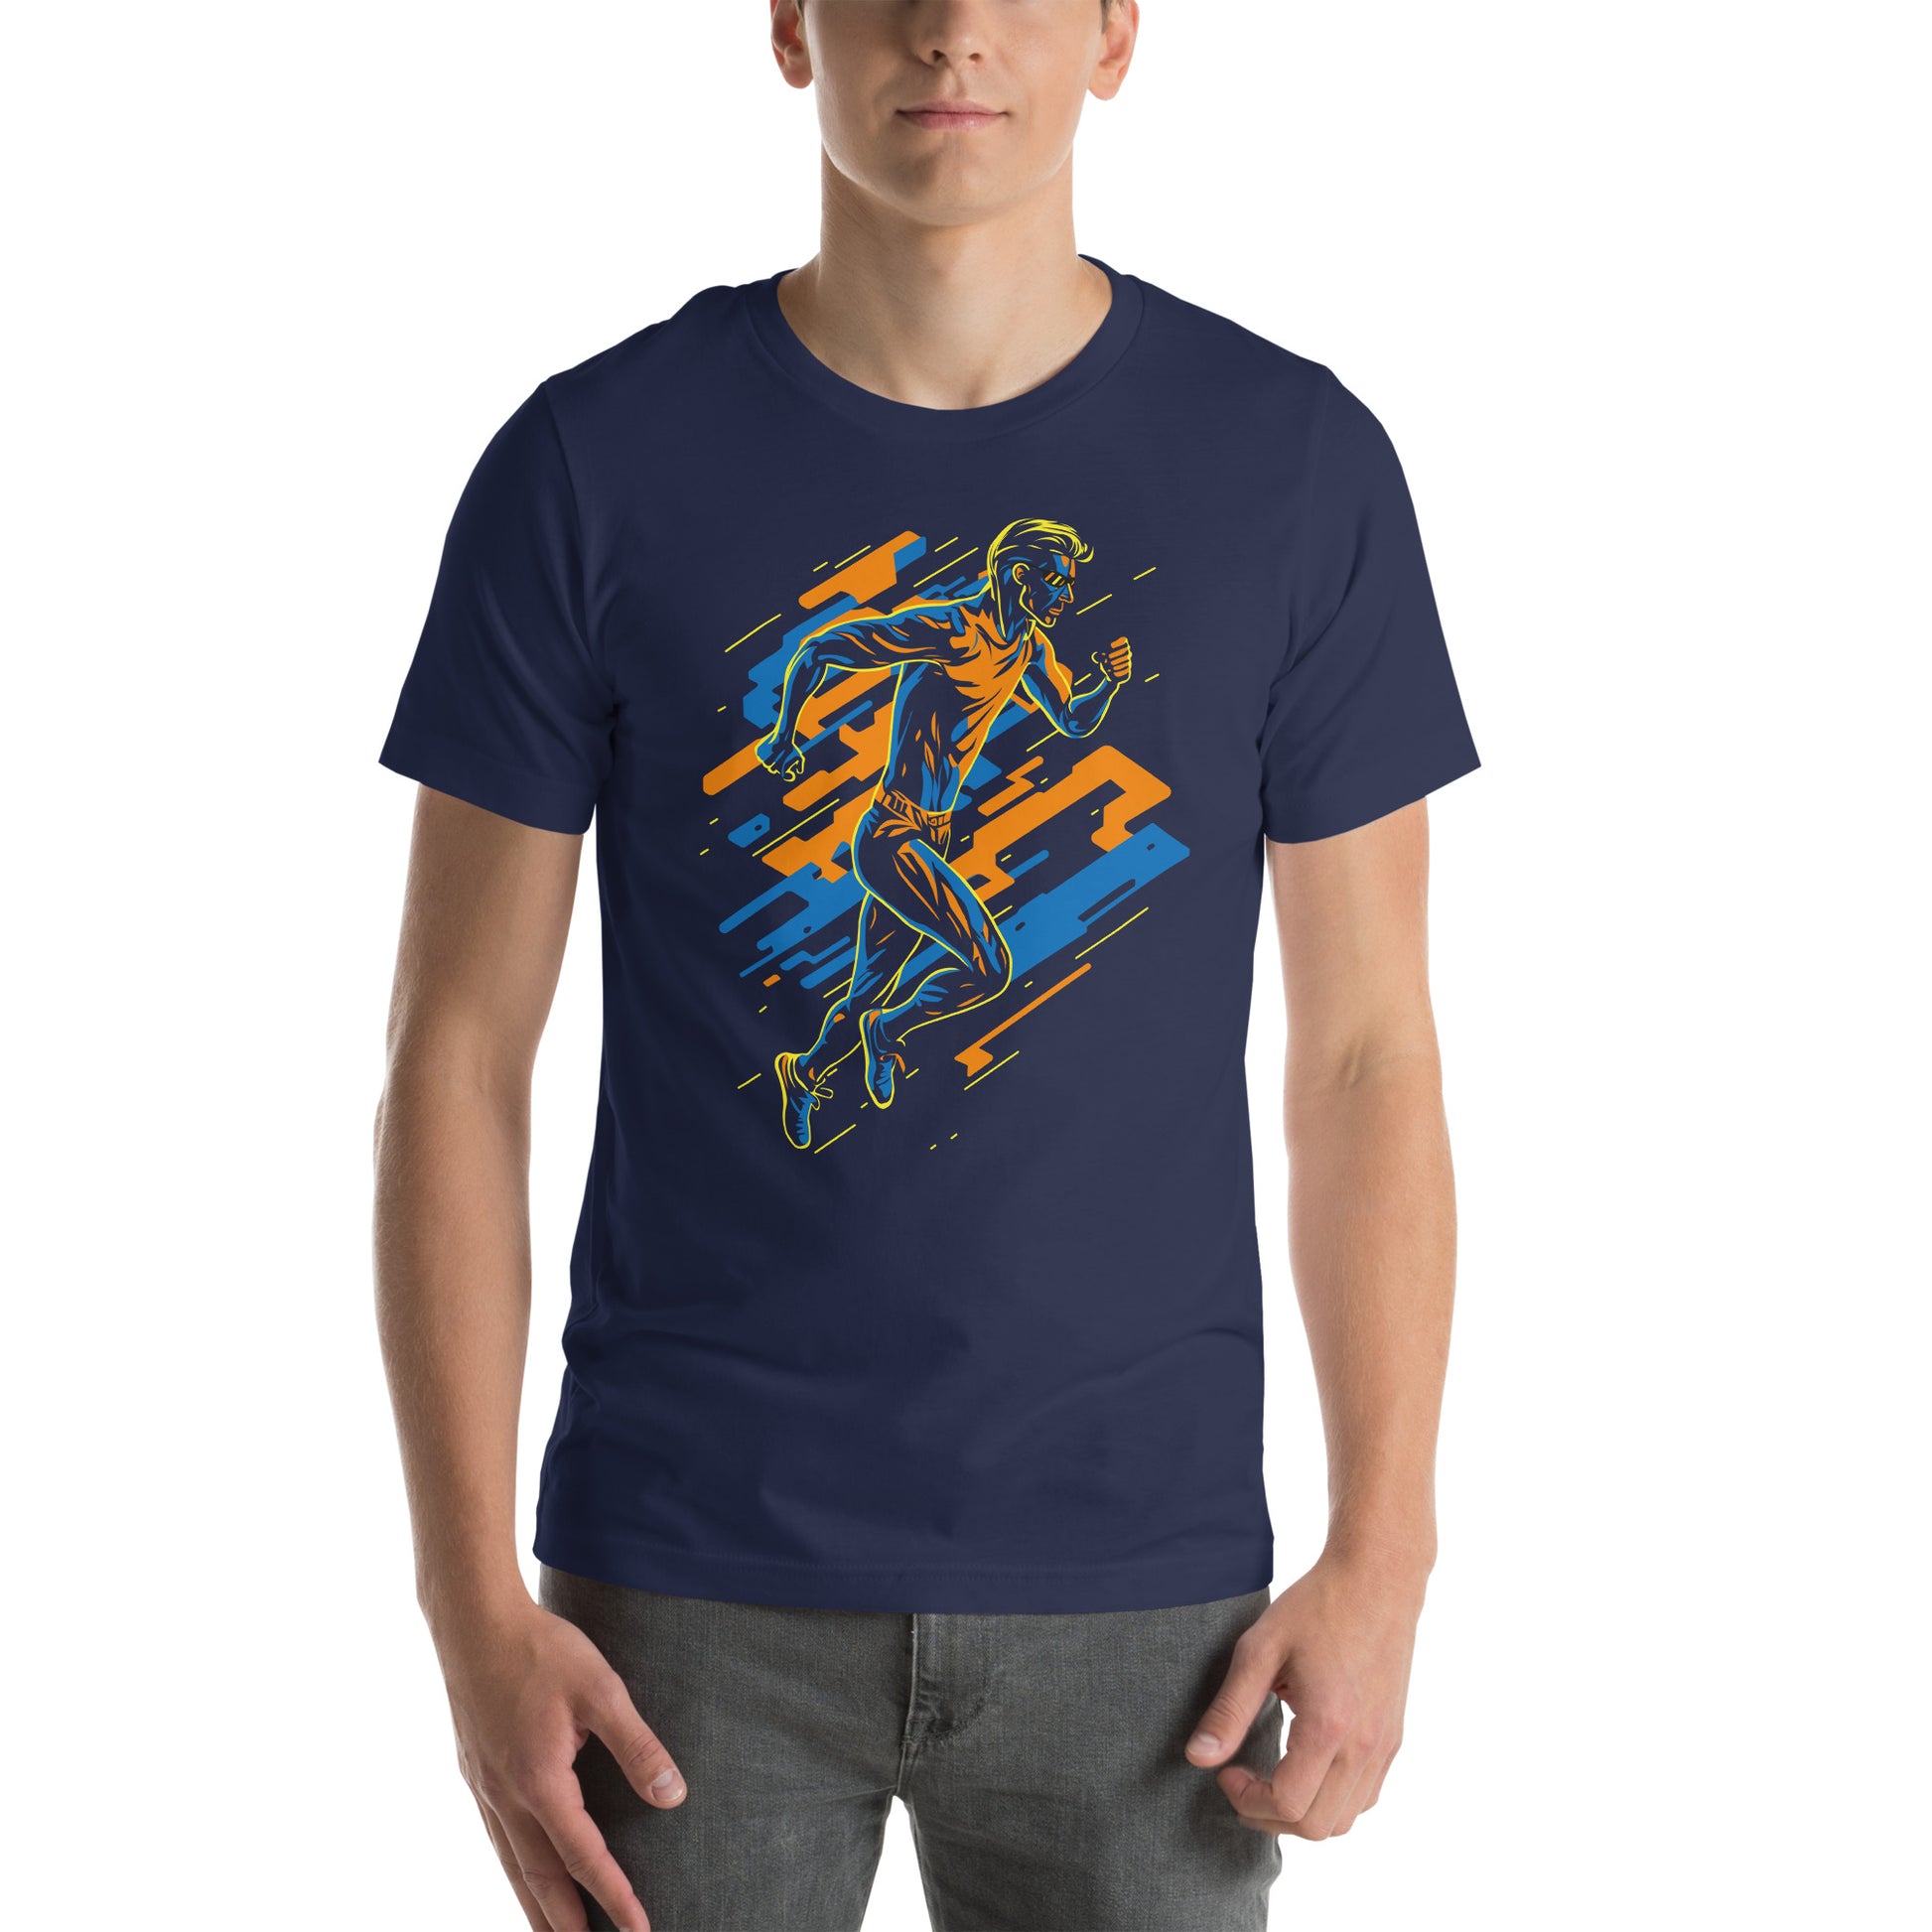 Navy blue T-Shirt featuring a vibrant and dynamic runner design, capturing the energy of a 'Running Man'. Taken from the TEQNEON Radioactive collection